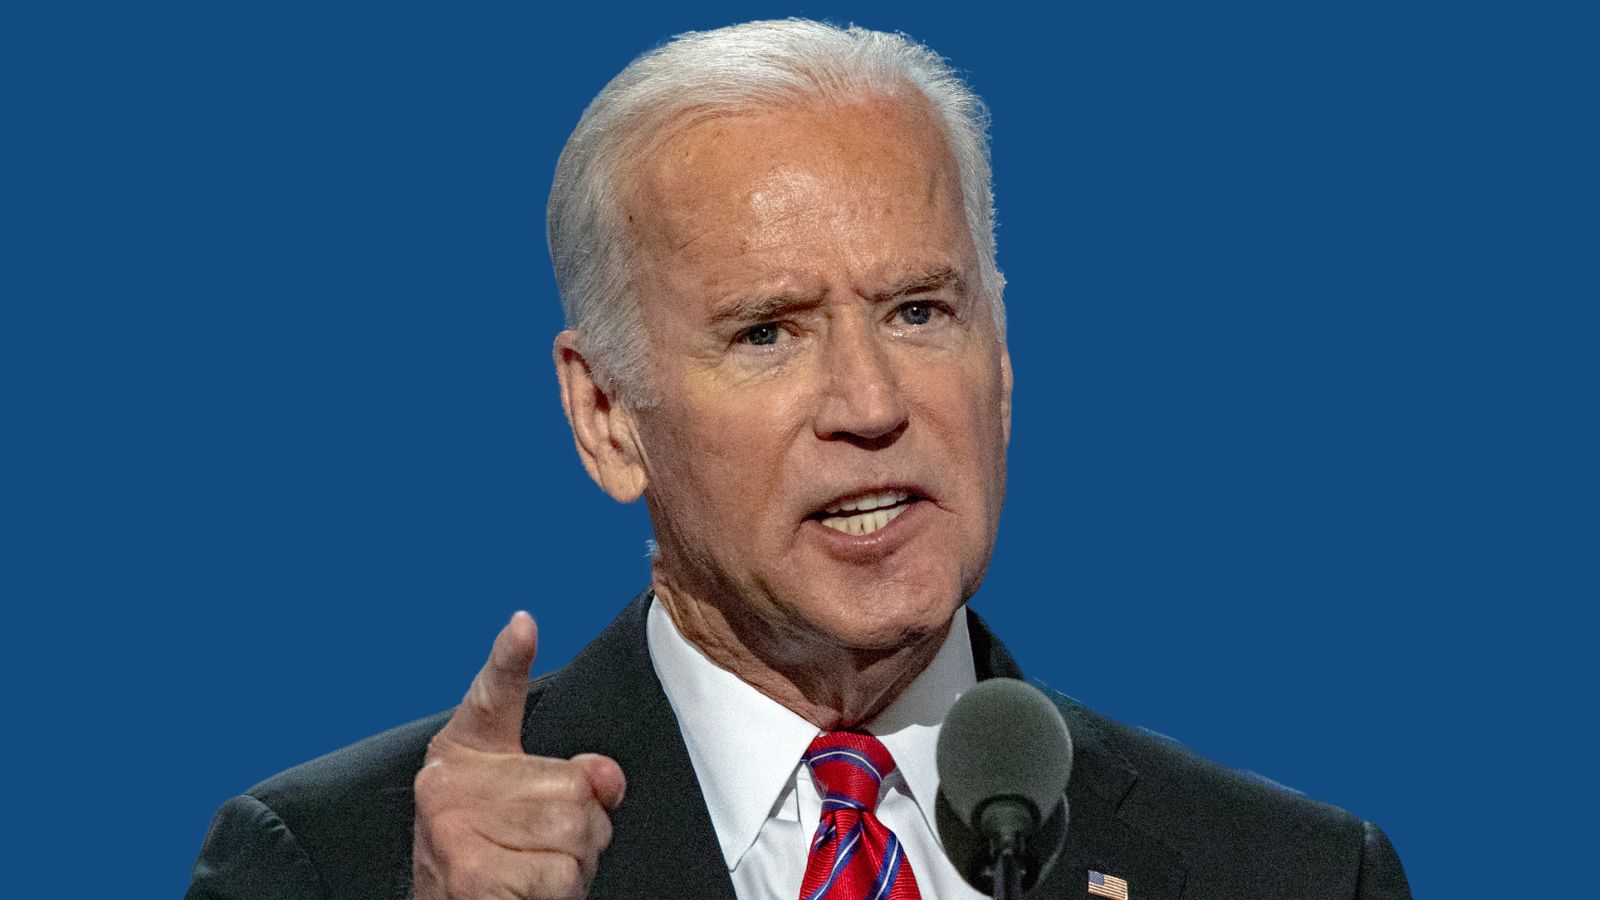 Biden is “The Worst President in Our History”: Laura Ingraham’s Opinions Divide the Nation